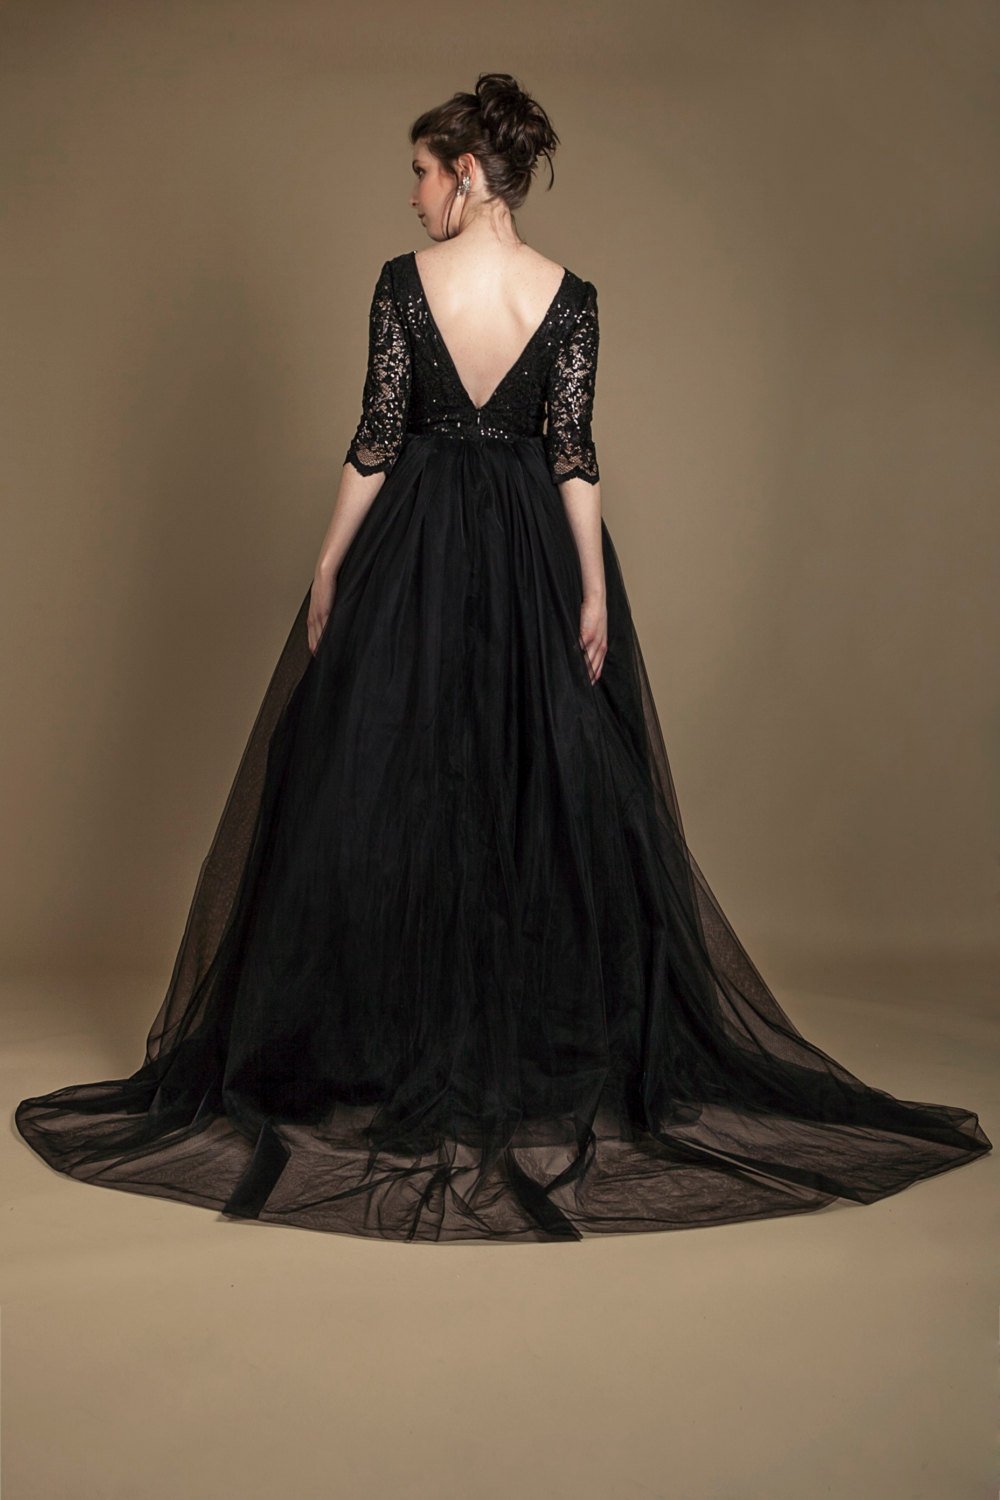 Great Black Dress At Wedding  The ultimate guide 